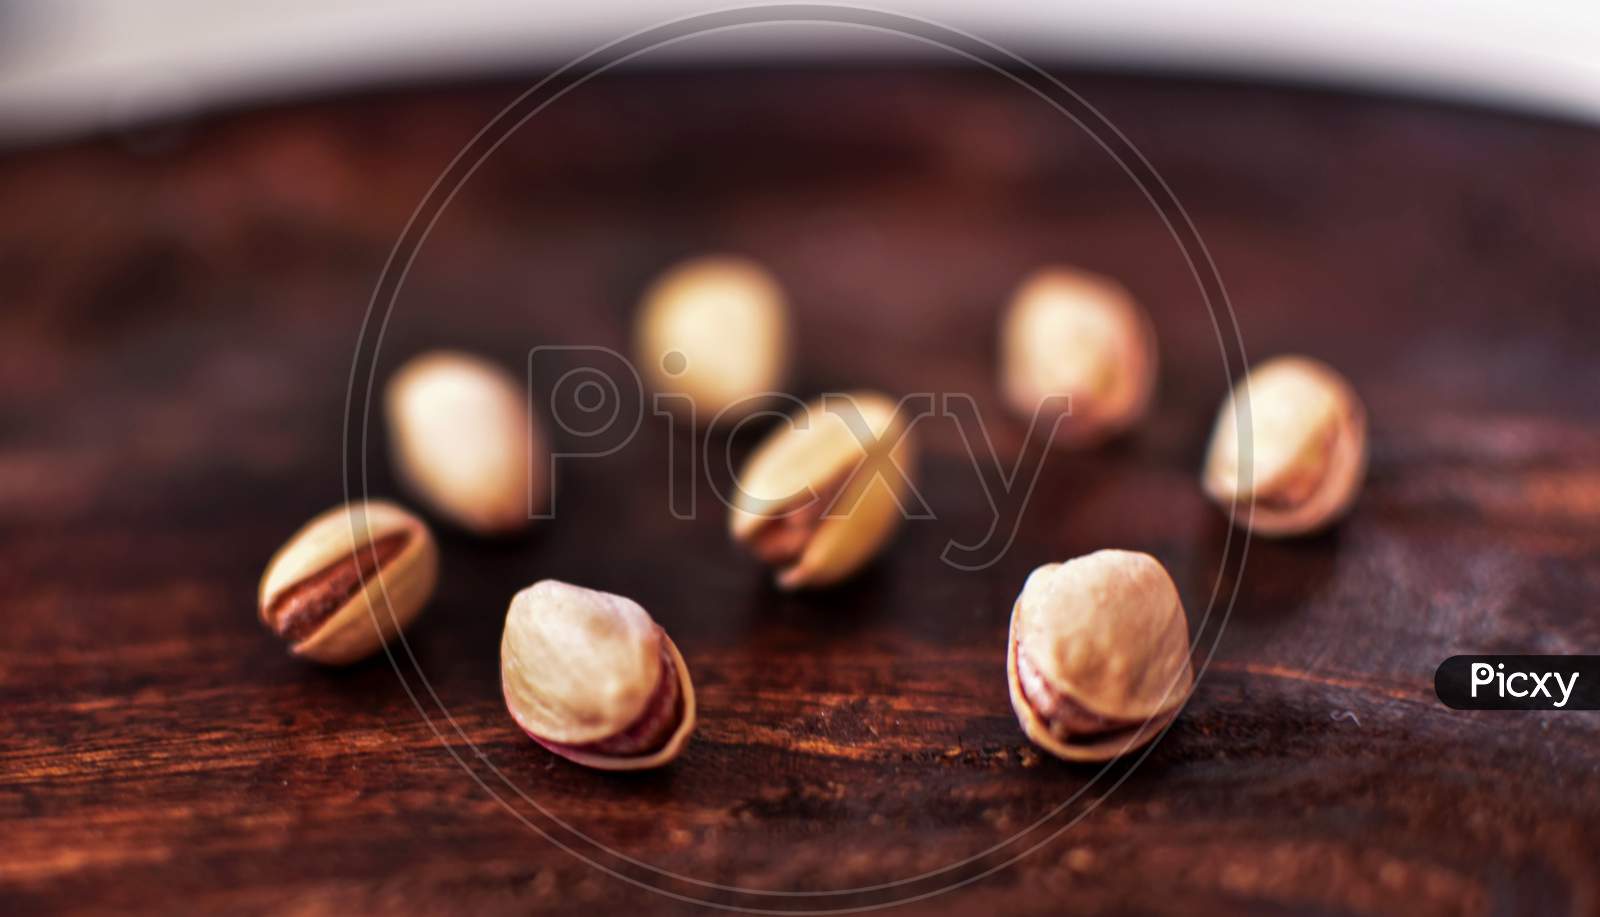 Pistachio nuts with selective focus